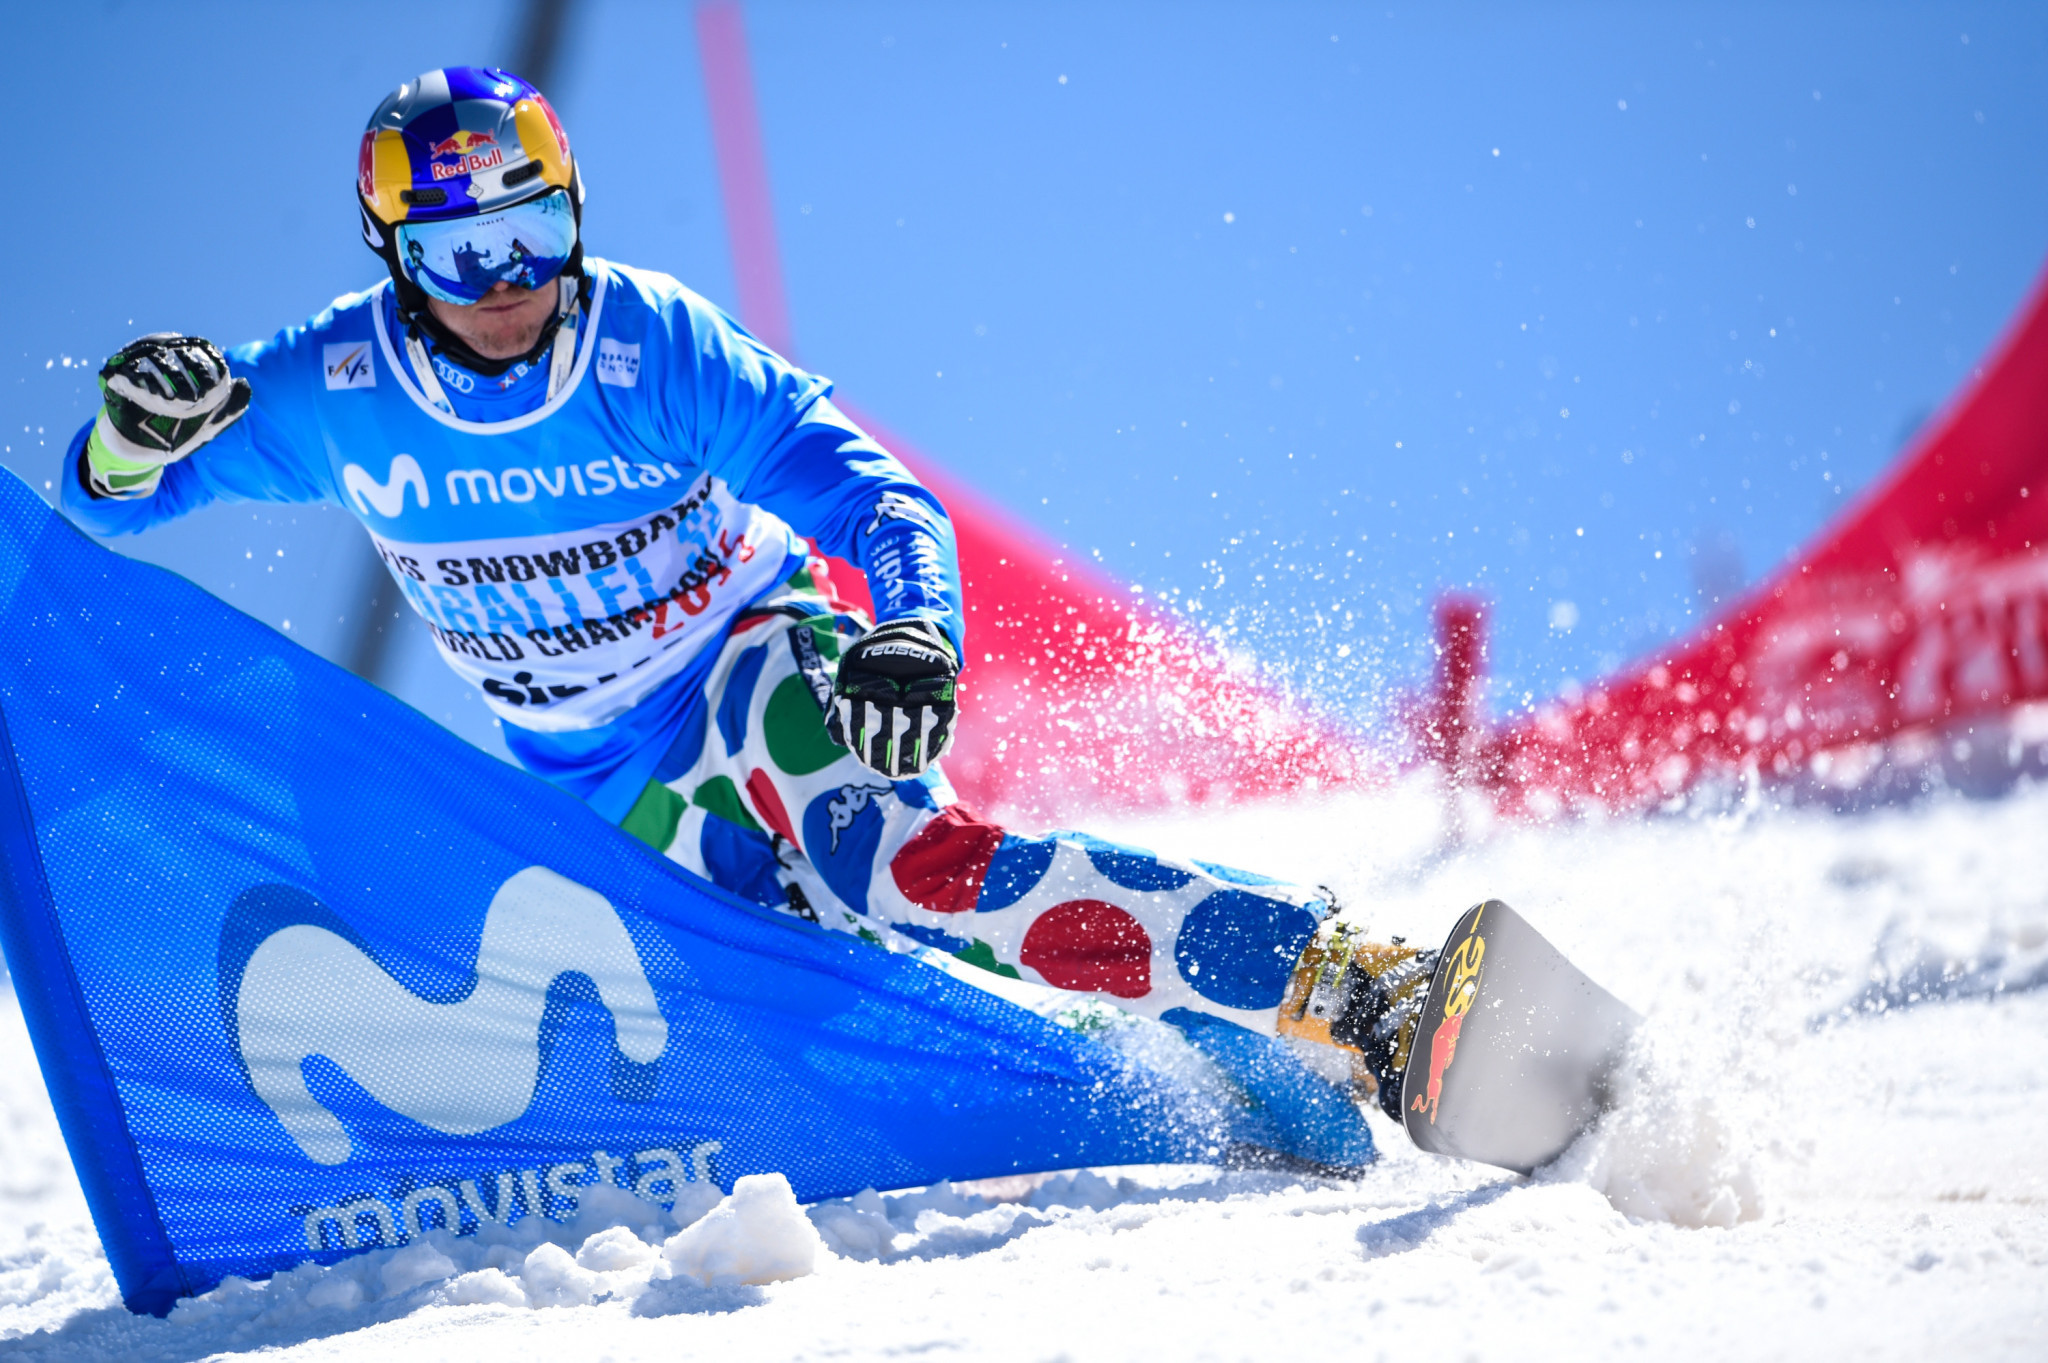 Fischnaller clinches Alpine Snowboard World Cup title on home snow